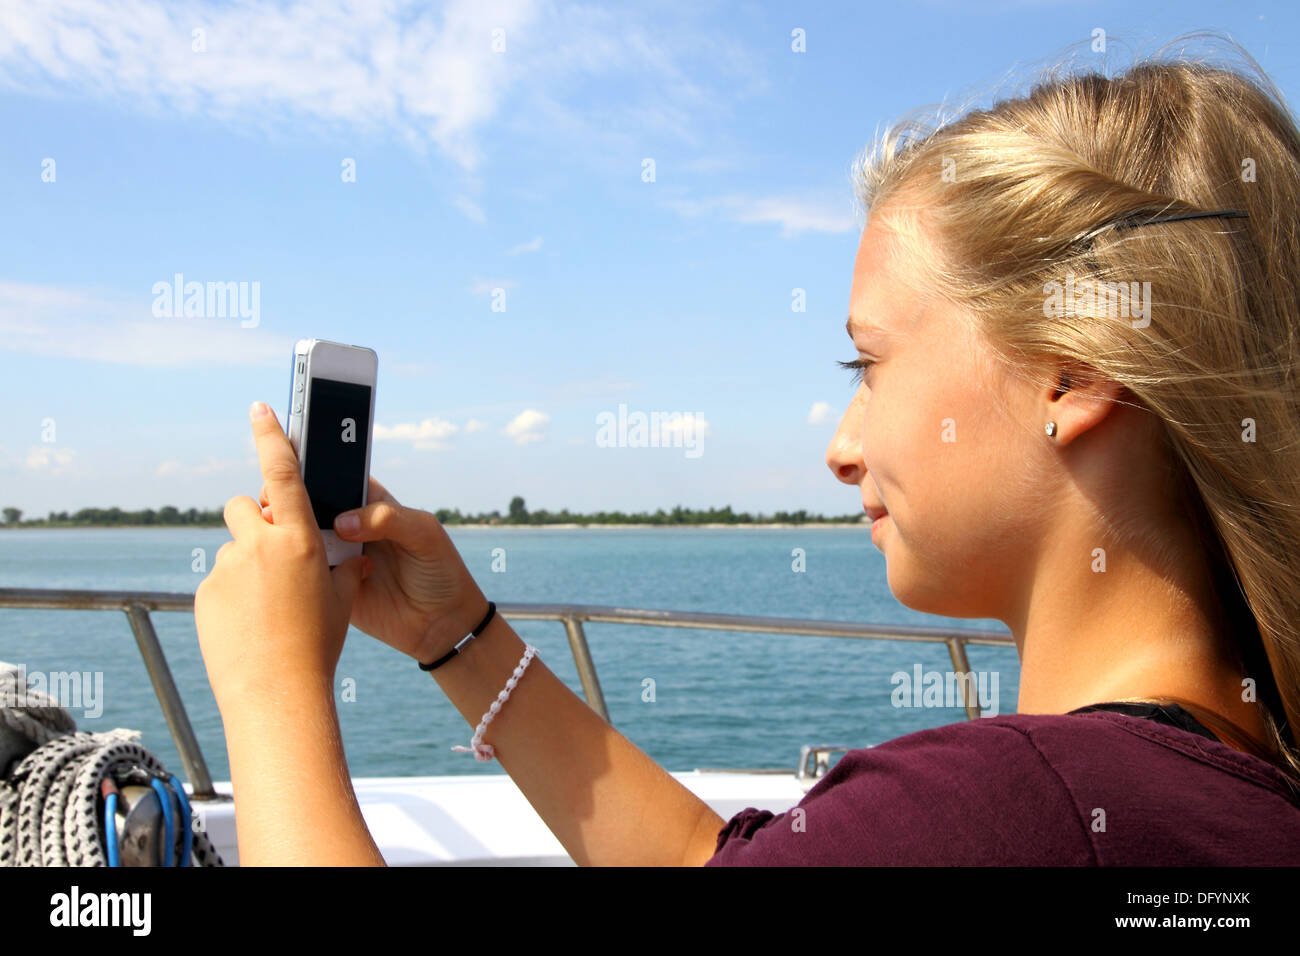 Smiling blond girl with phone on the ship, horizontal Stock Photo